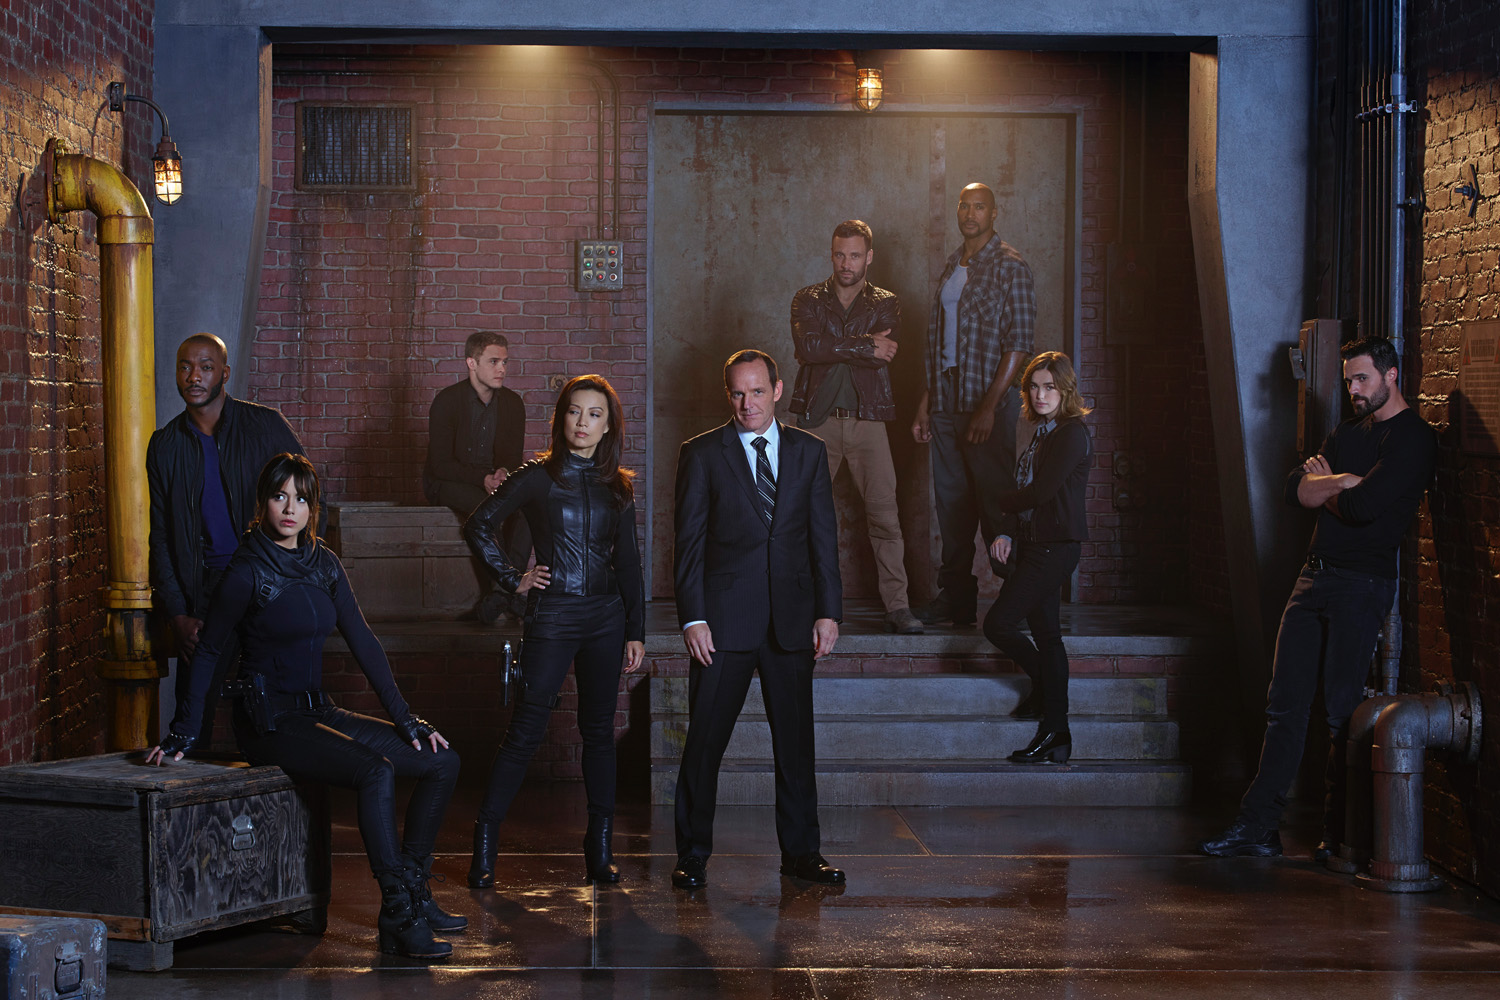 ABC/Marvels' Agents of Shield